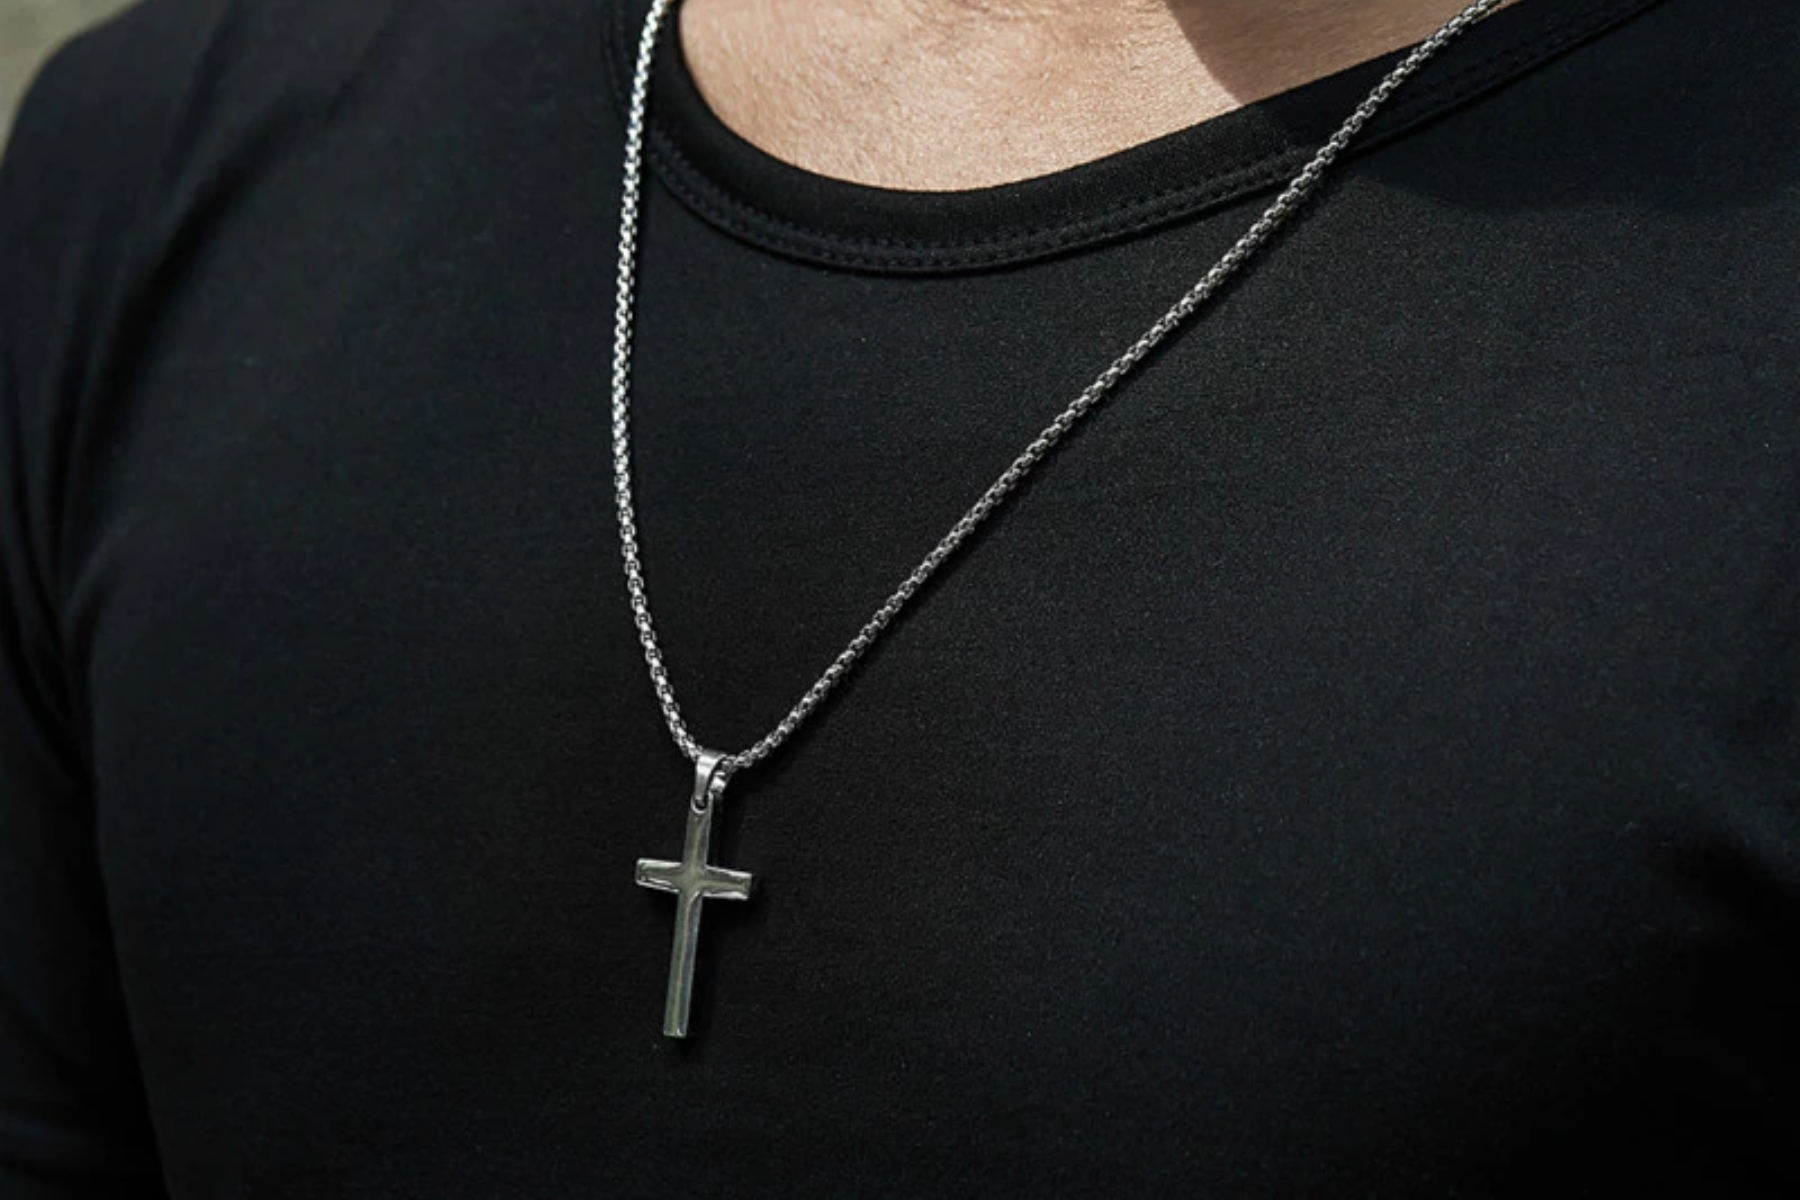 A man in a simple black shirt and a cross pendant necklace